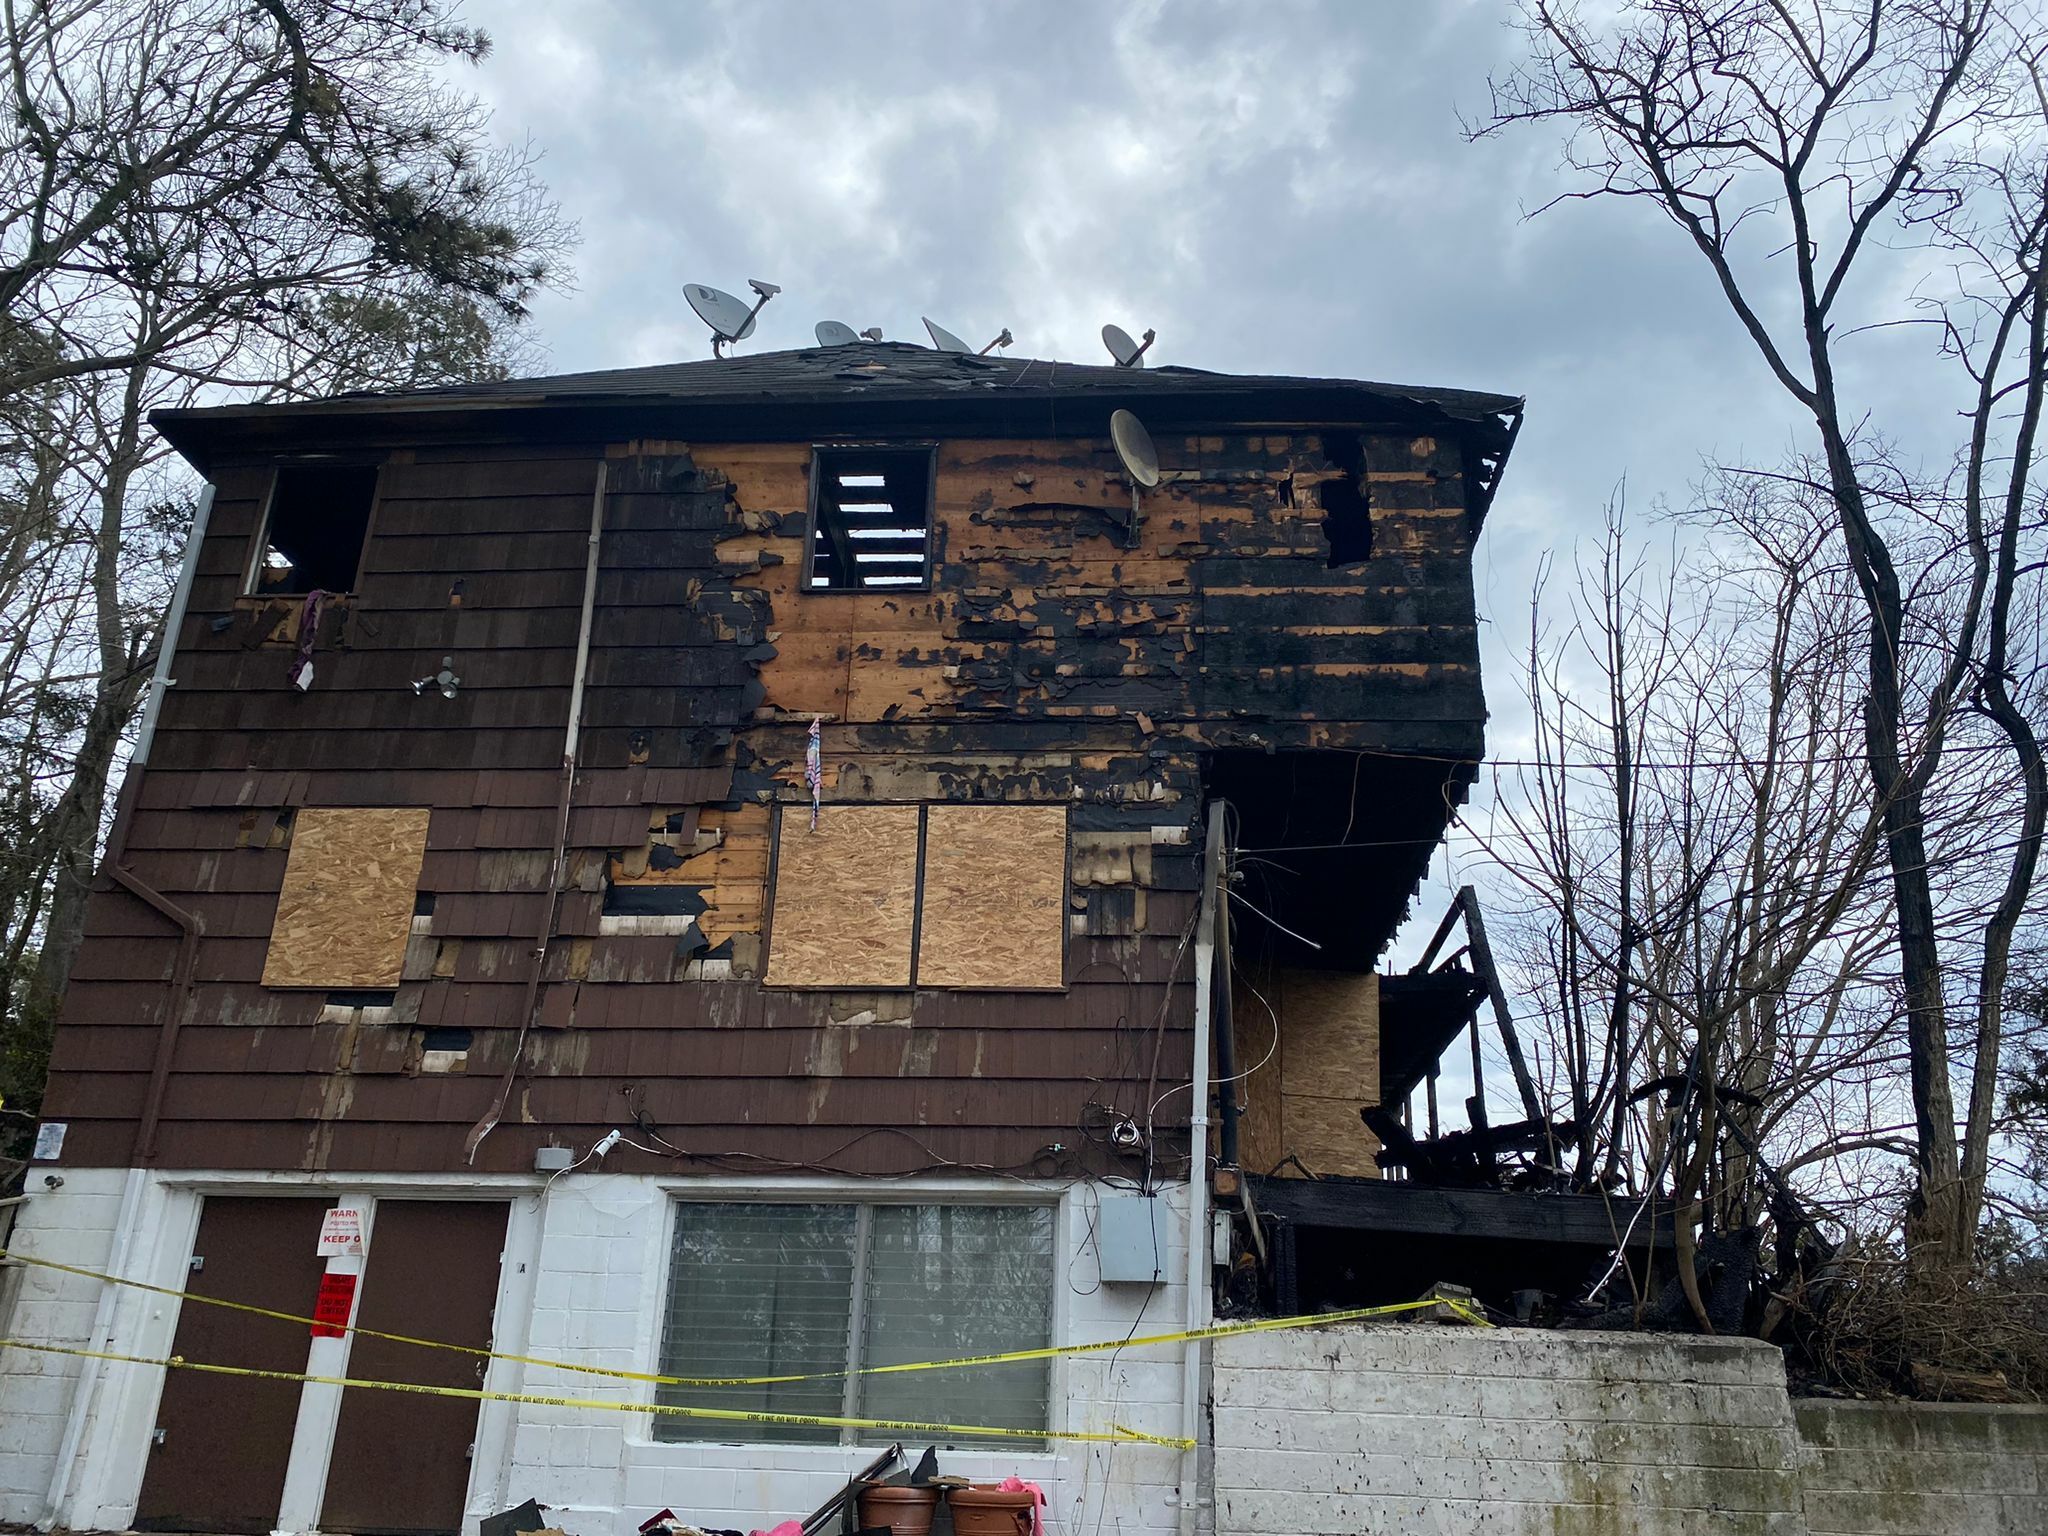 The aftermath of the fire at the 317 East Montauk Highway apartment building.   JULIANA HOLGUIN